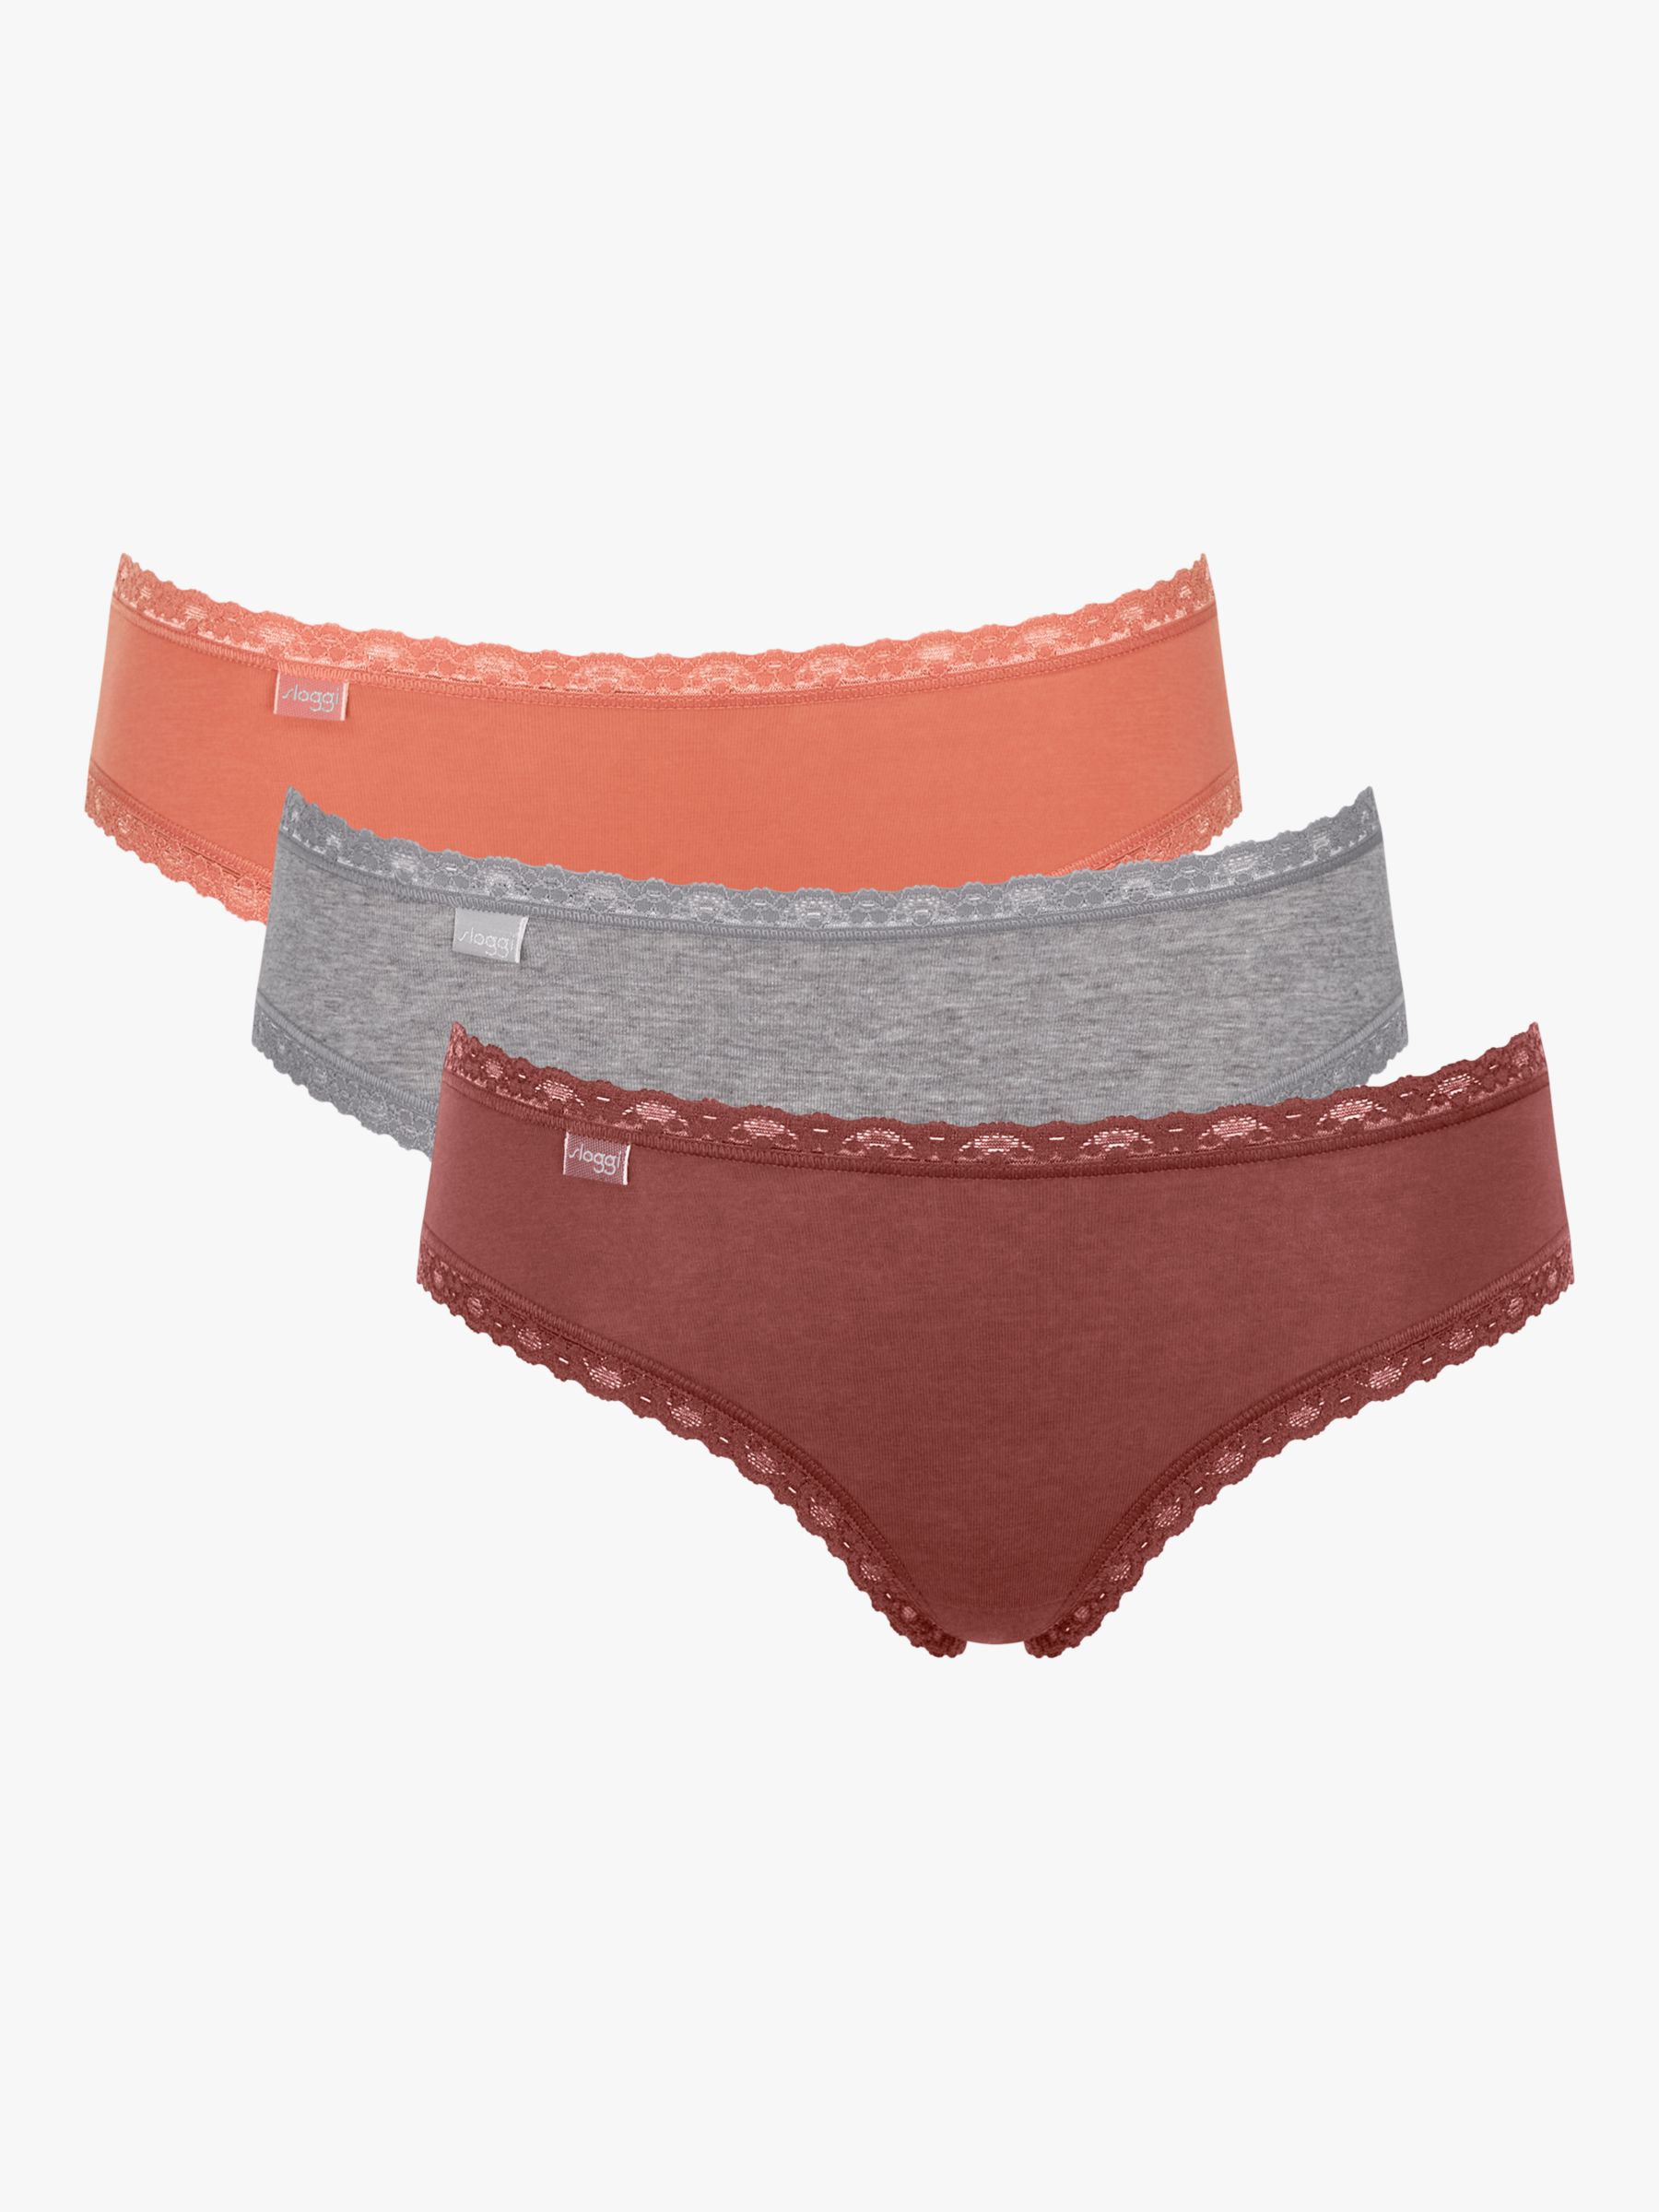 Sloggi 24-7 Weekend Hipster Brief in Neon Colour Combination 3 Pack – Mish